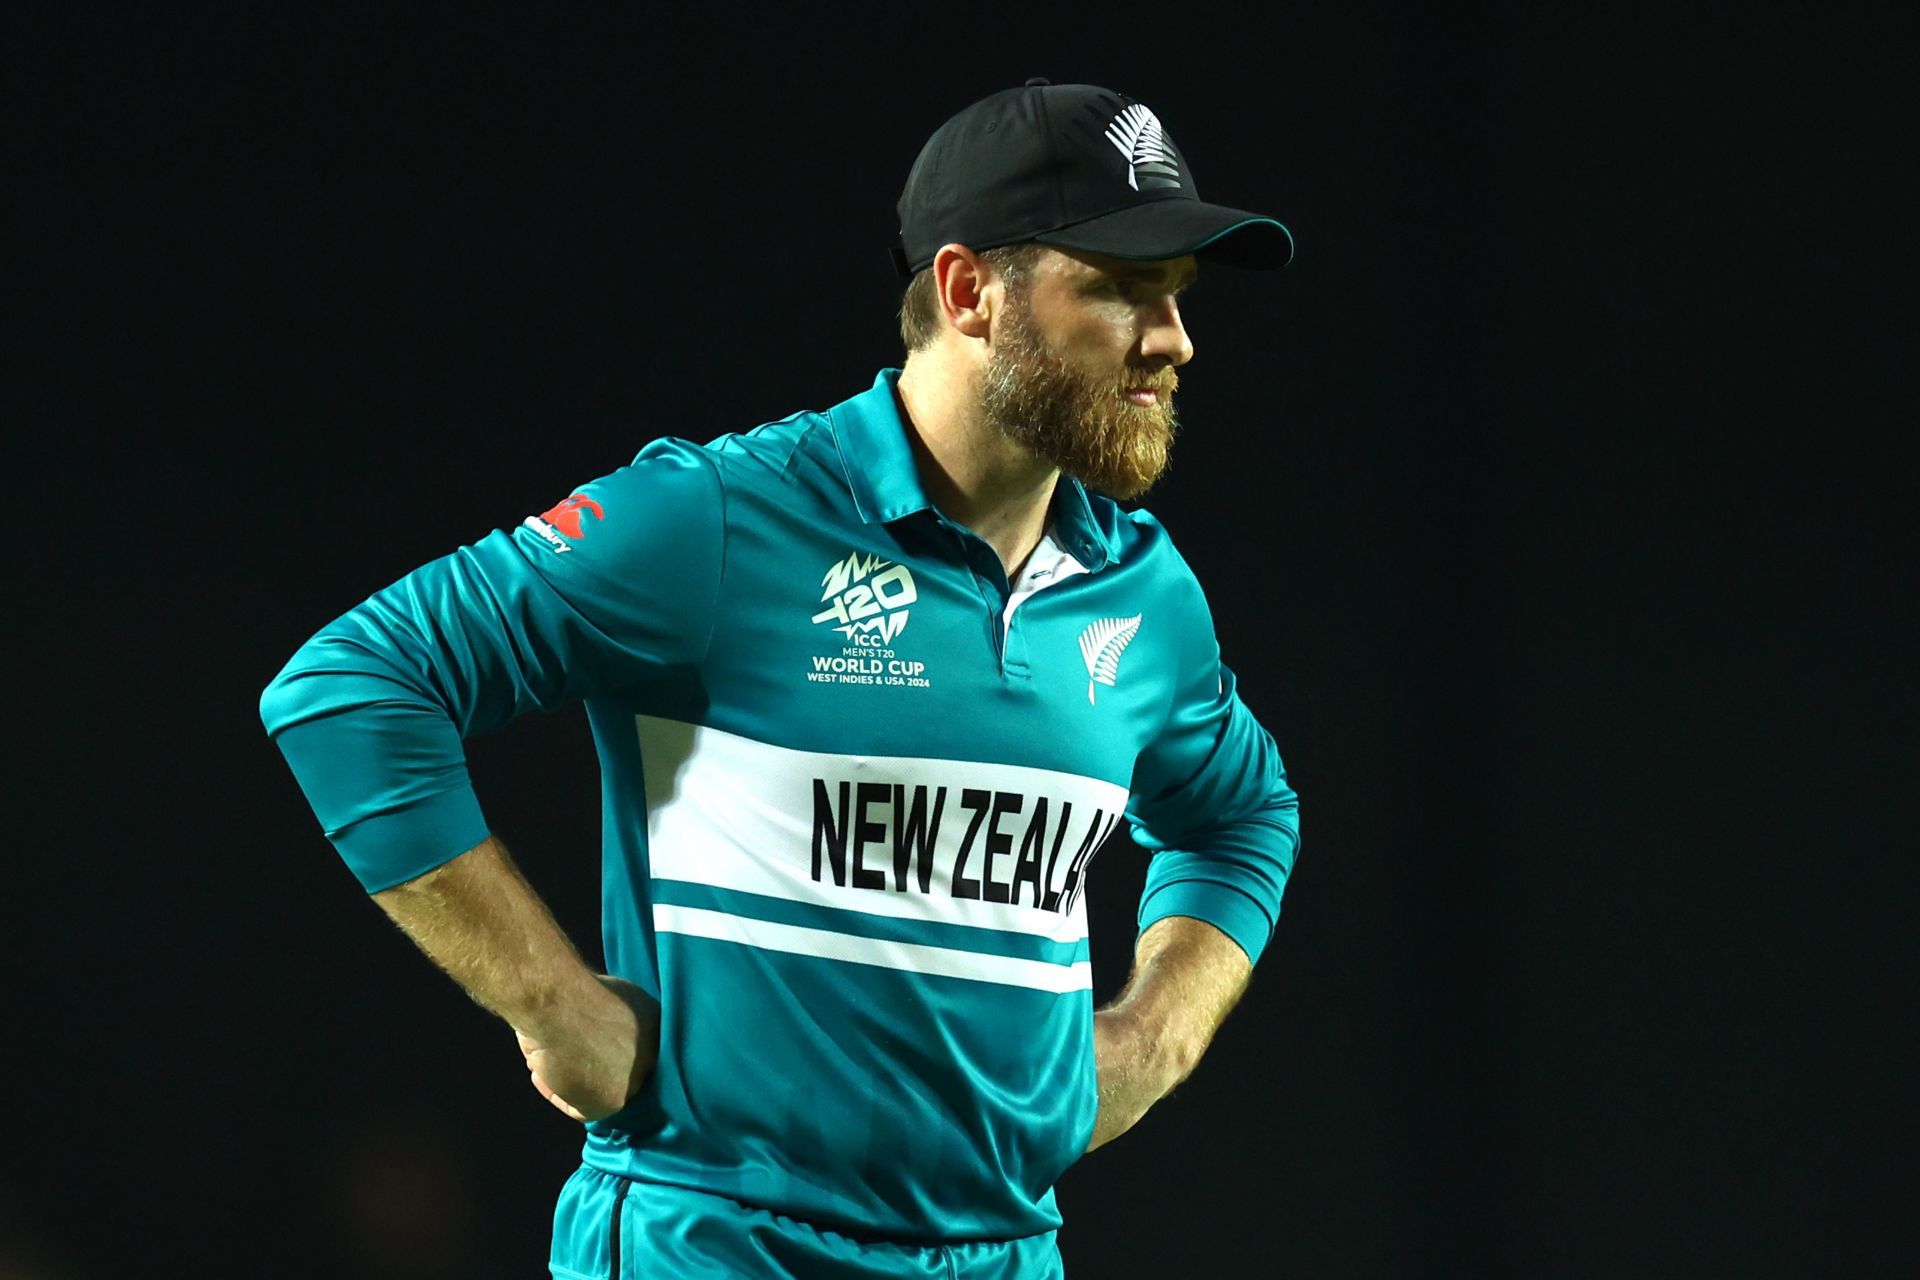 New Zealand have been eliminated from the tournament (Image: Getty)